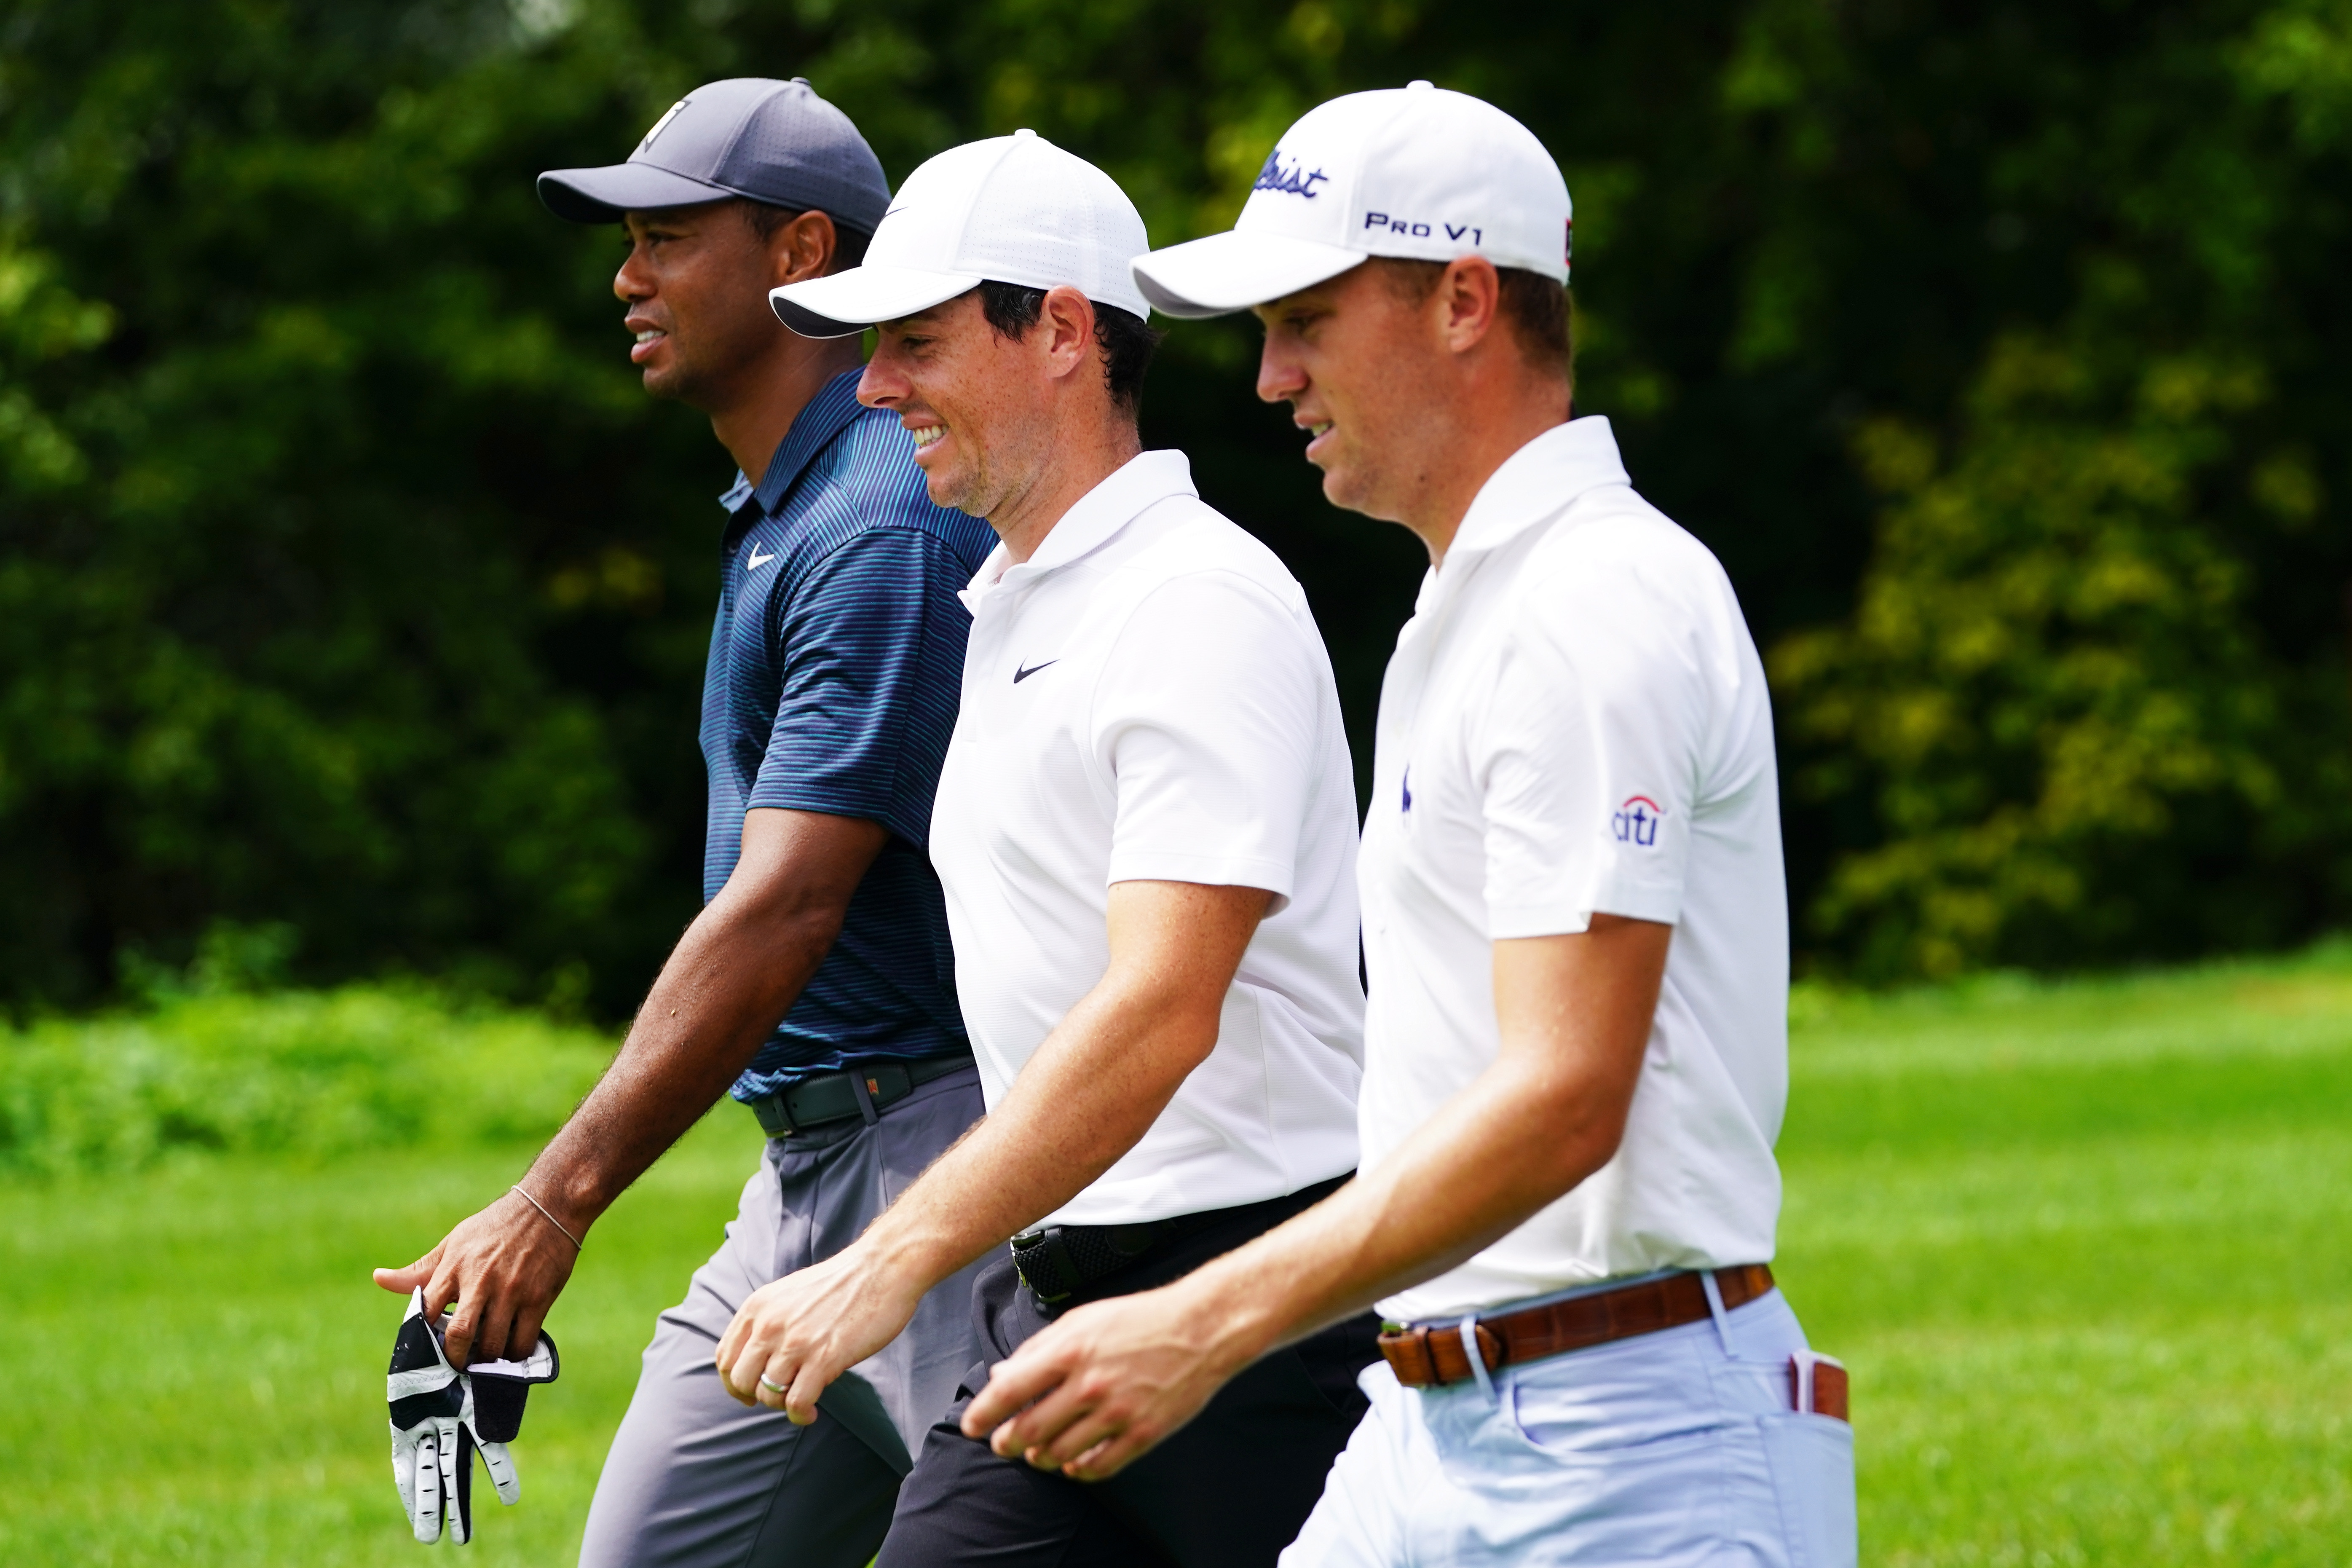 We followed Tiger Woods, Rory McIlroy and Justin Thomas at Bellerive. Here's what we learned.